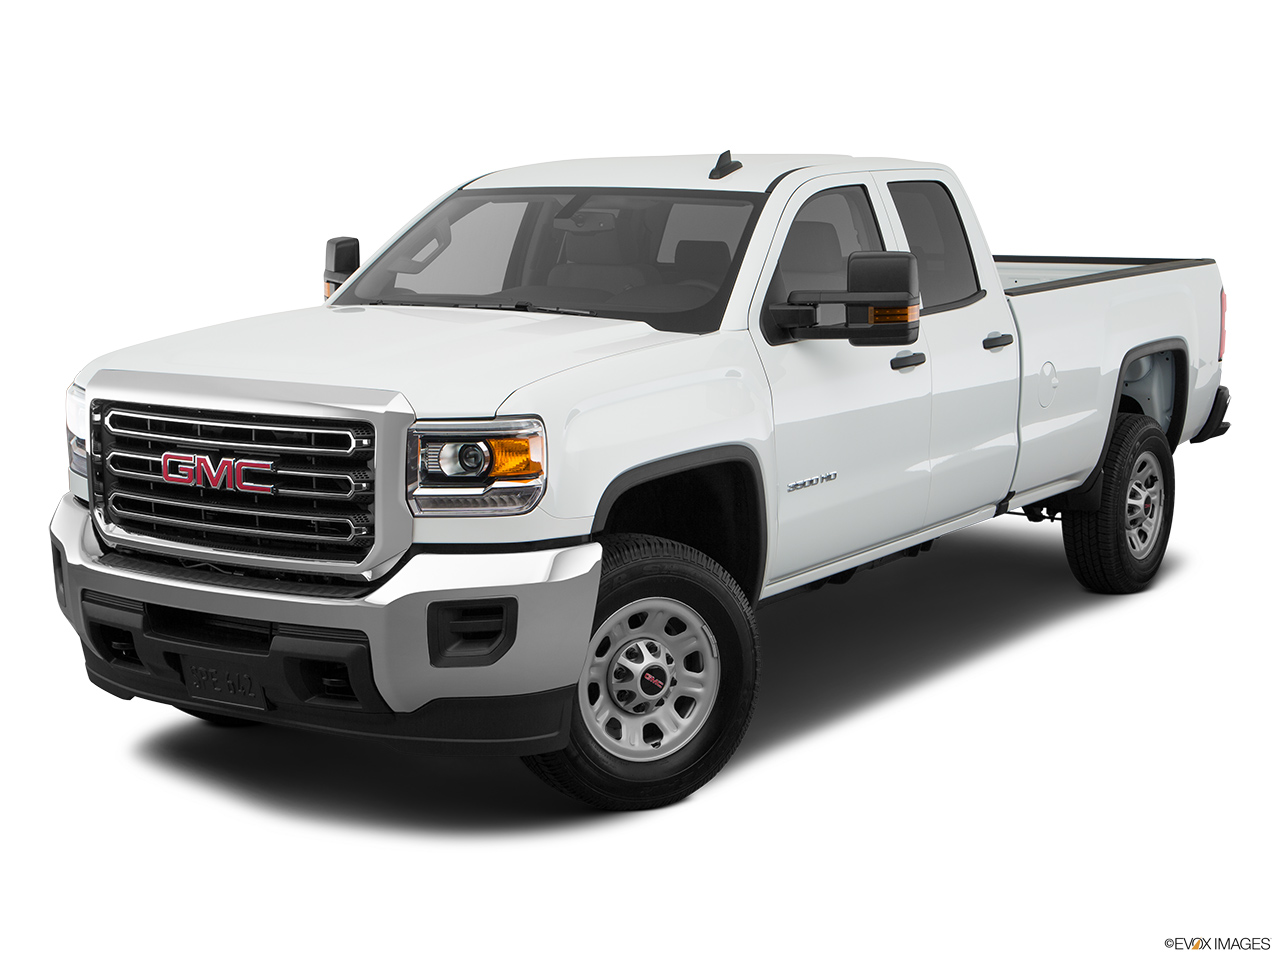 2017 GMC Sierra 3500 HD Base Front angle view. 